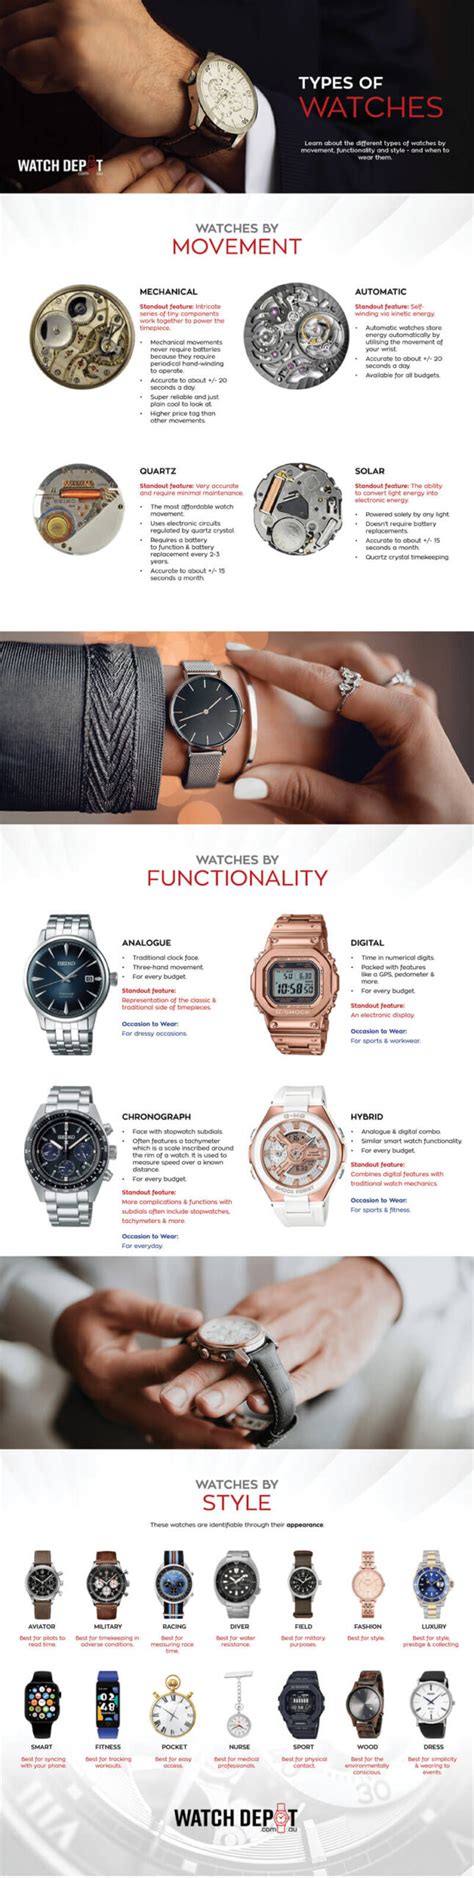 Types Of Watches And Watch Terms Infographic Portal